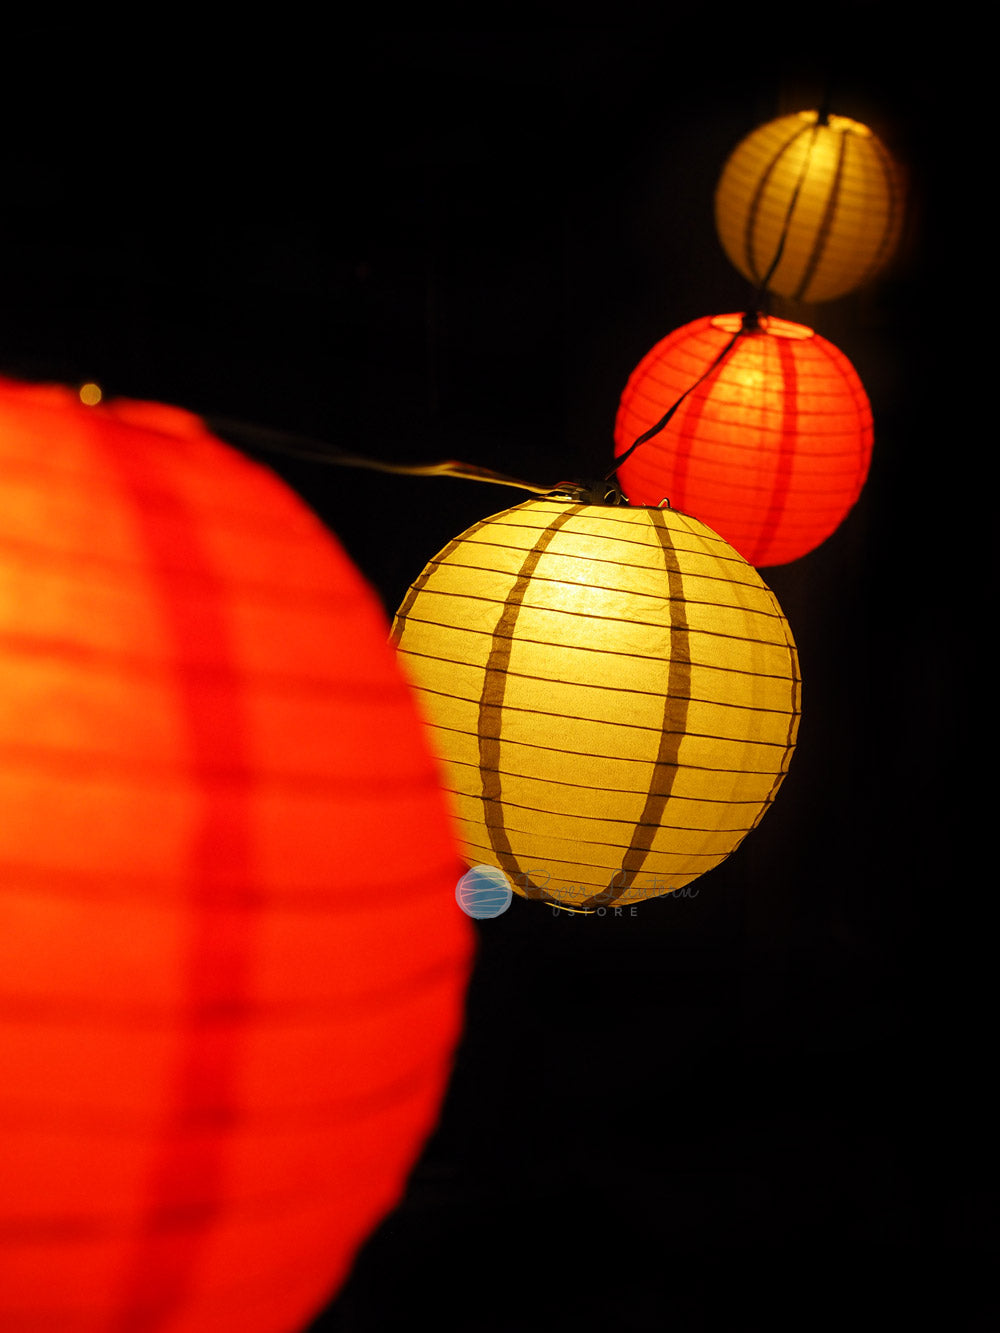 8&quot; Chinese New Year Red and Gold Paper Lantern String Light COMBO Kit (12 FT, EXPANDABLE, Black Cord) - PaperLanternStore.com - Paper Lanterns, Decor, Party Lights &amp; More